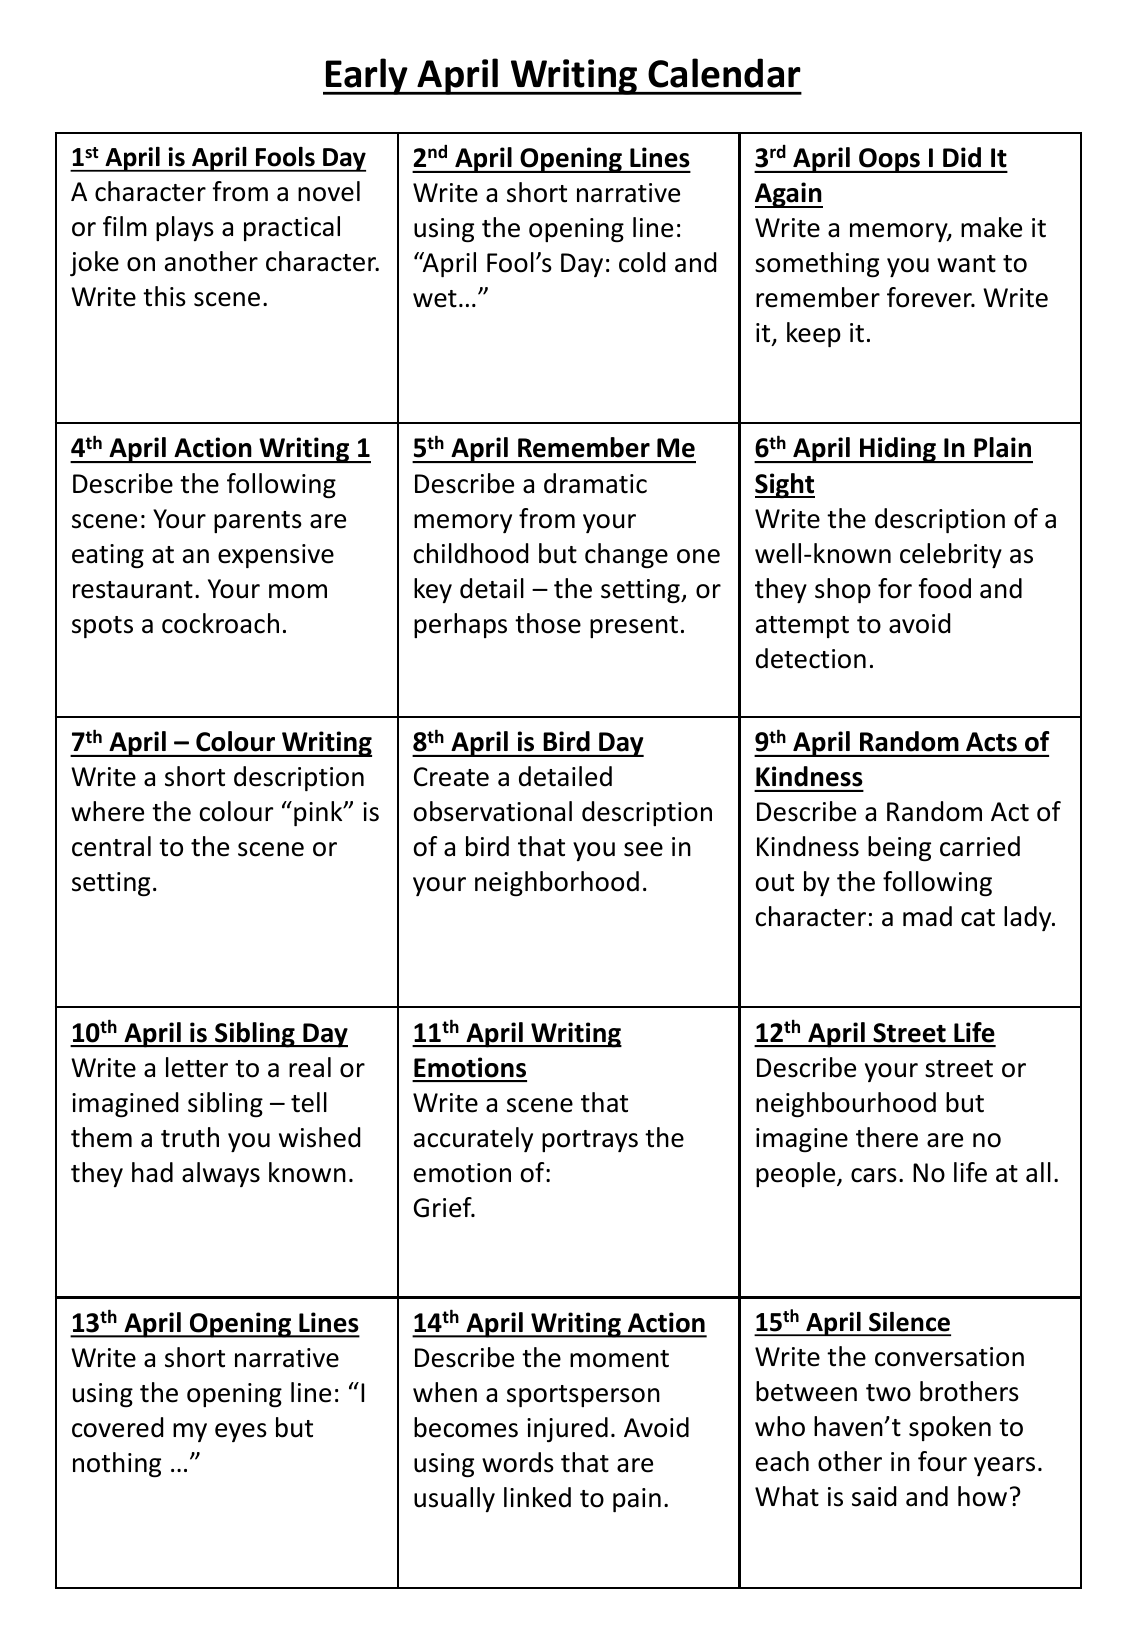 Creative Writing Remote Learning Activities - April